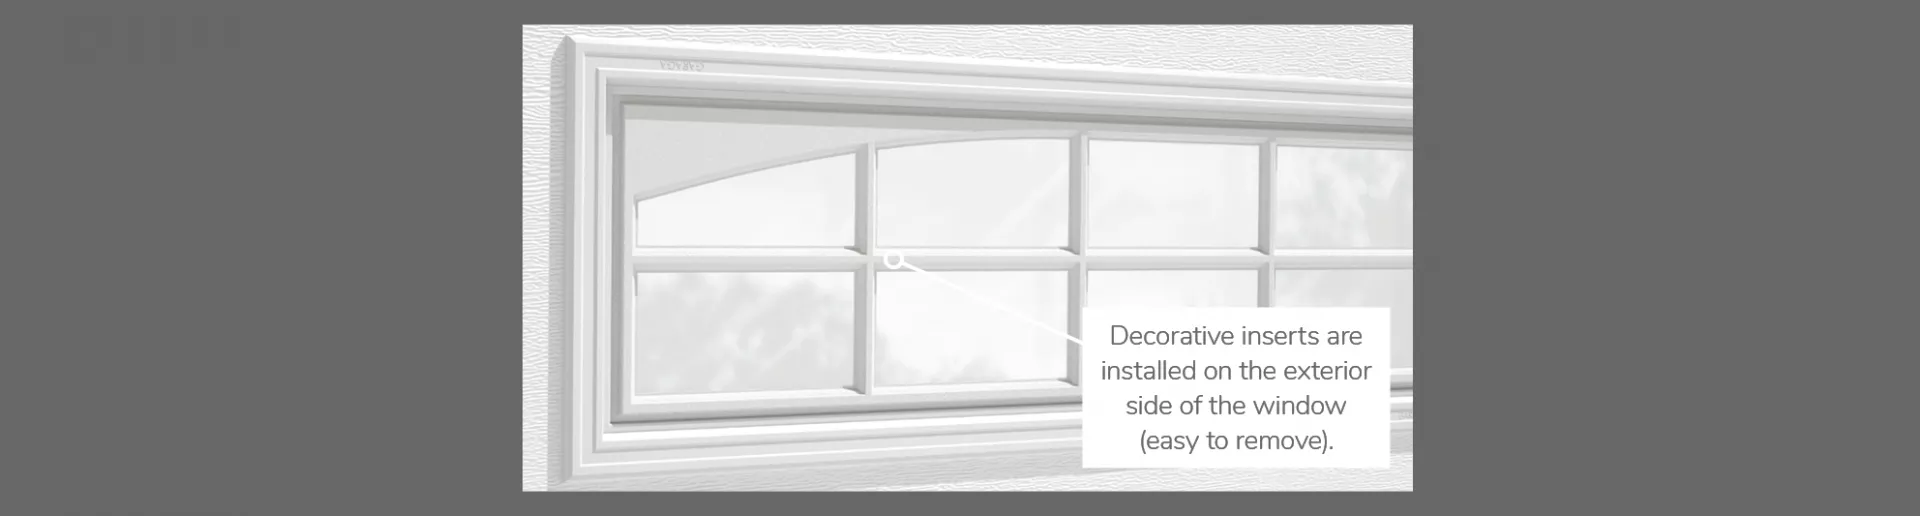 Double Stockton Arch Decorative Insert, 41" x 16", available for door 3 layers - Polystyrene, 2 layers - Polystyrene and Non-insulated